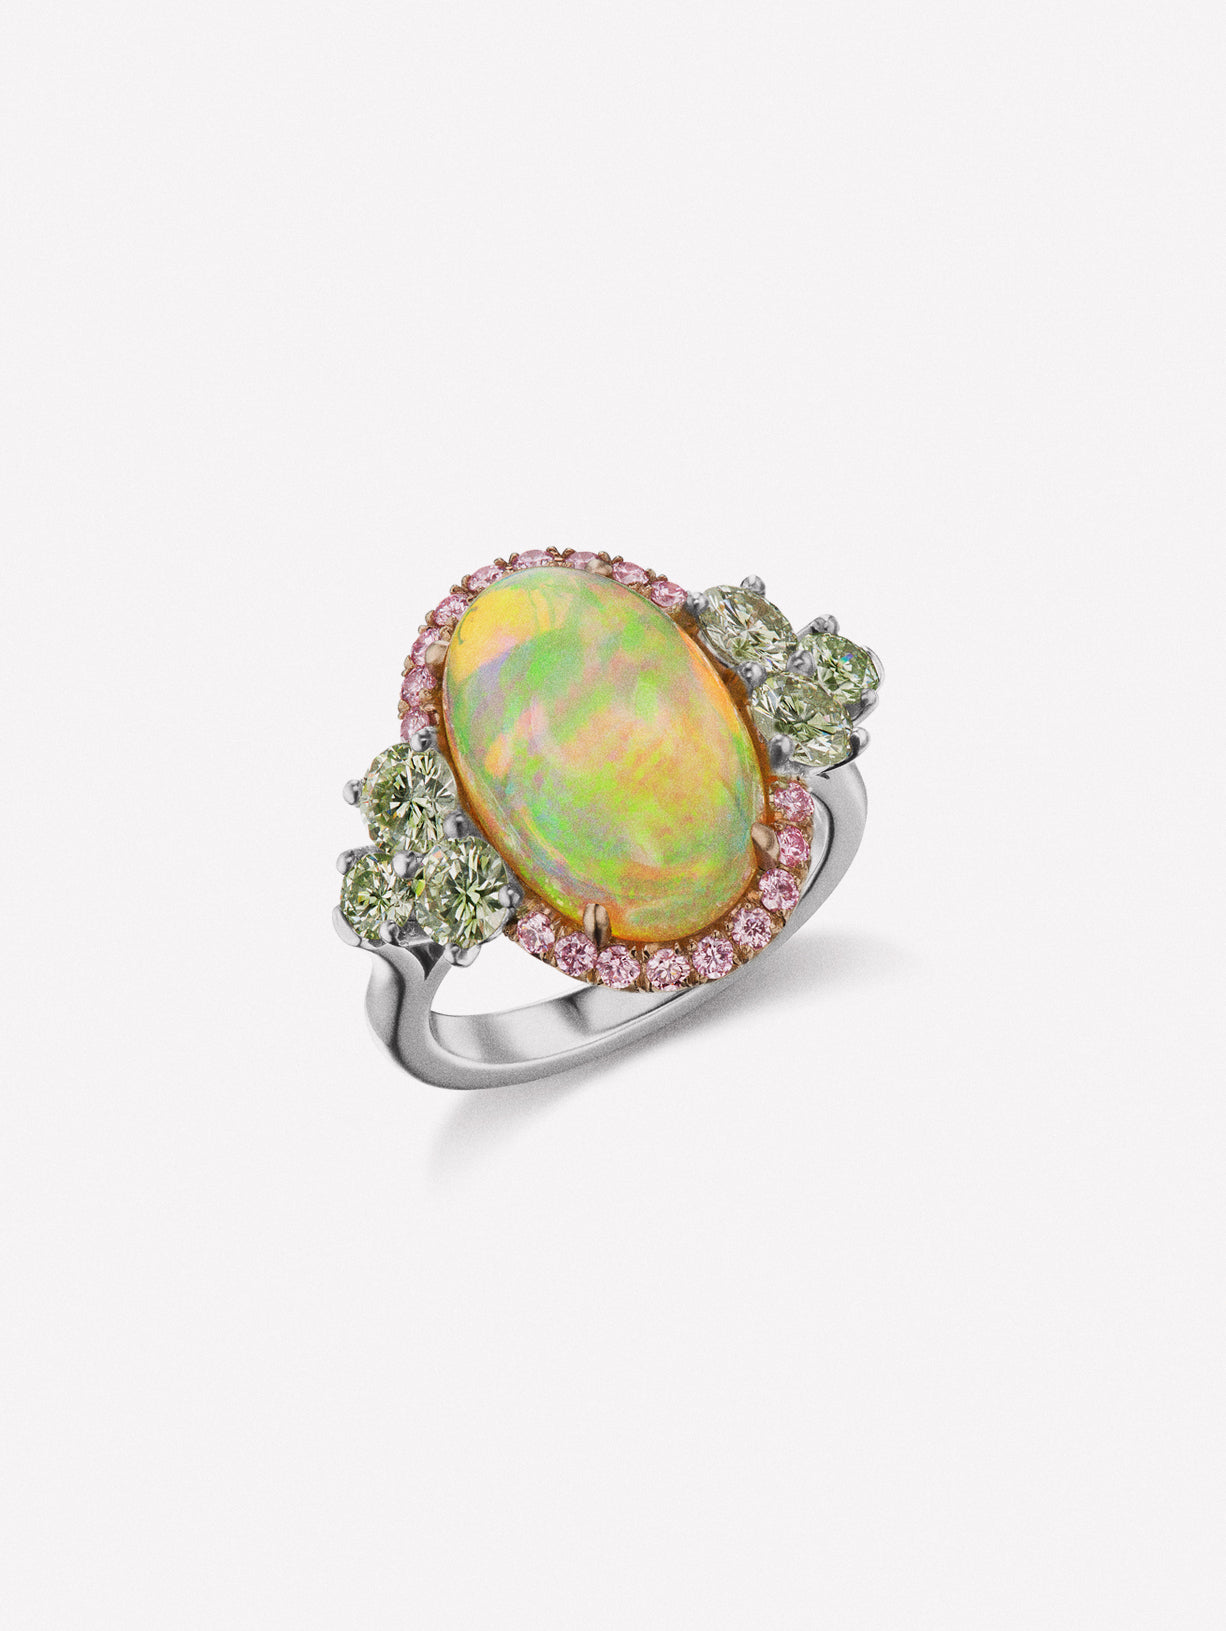 Pink diamond and opal ring. Cabochon opal surrounded by Argyle Pink Diamonds and flanked by green diamonds